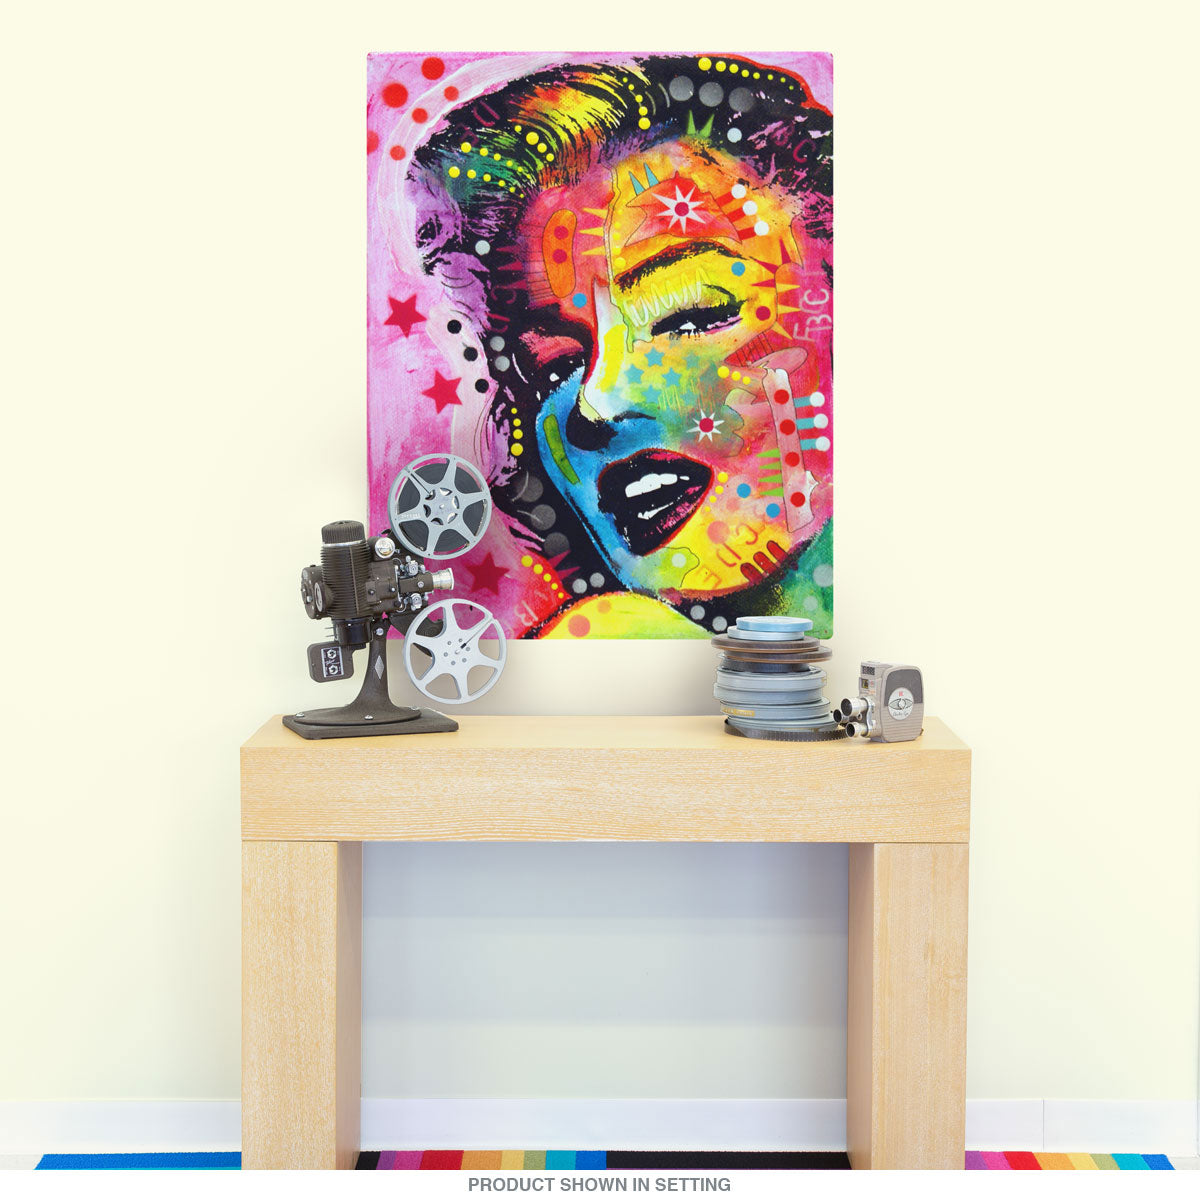 Accents, Marilyn Monroe Peel Stick Wall Decals